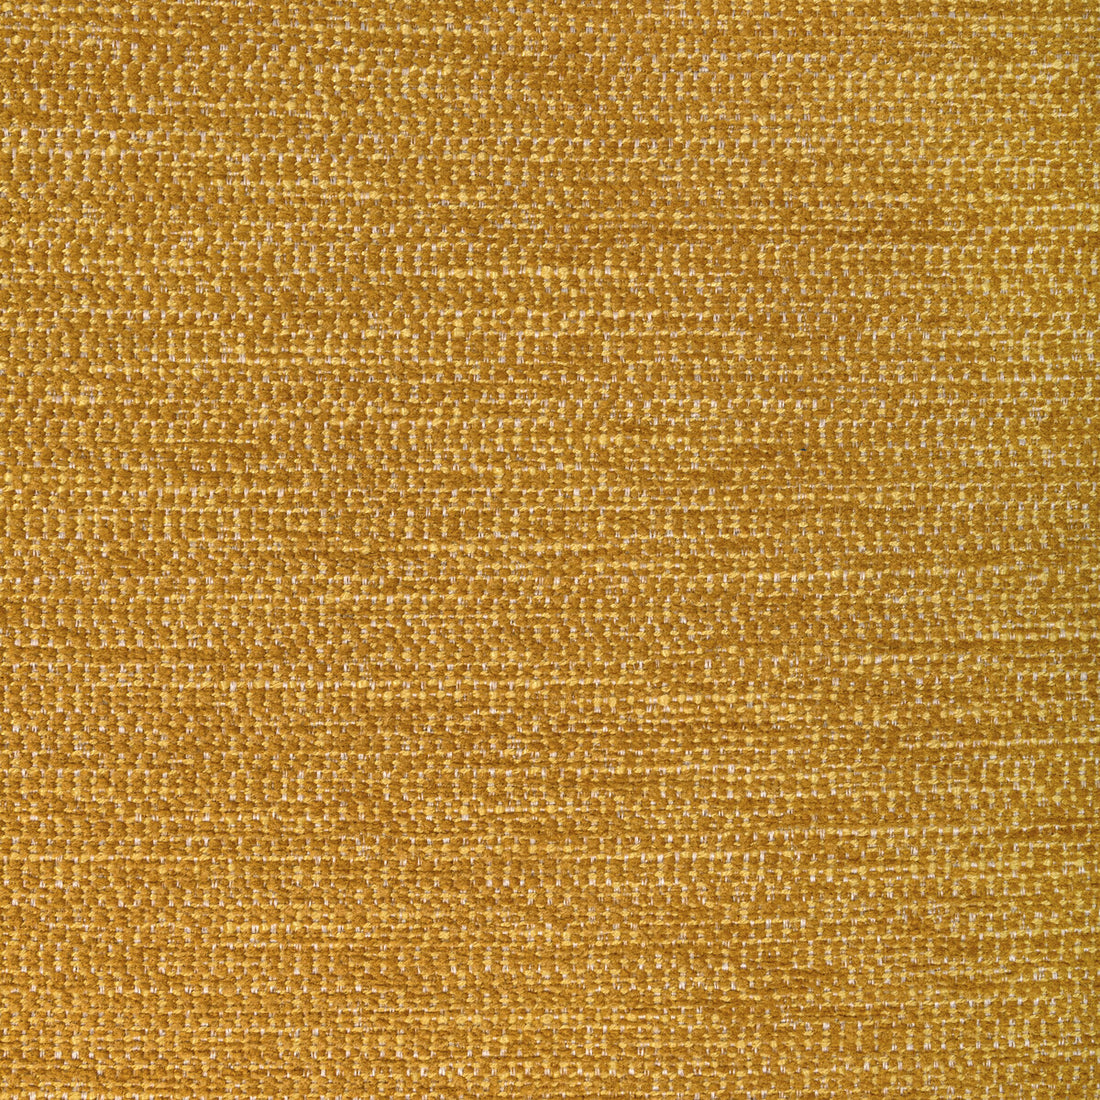 Recoup fabric in citrine color - pattern 36569.4.0 - by Kravet Contract in the Seaqual collection